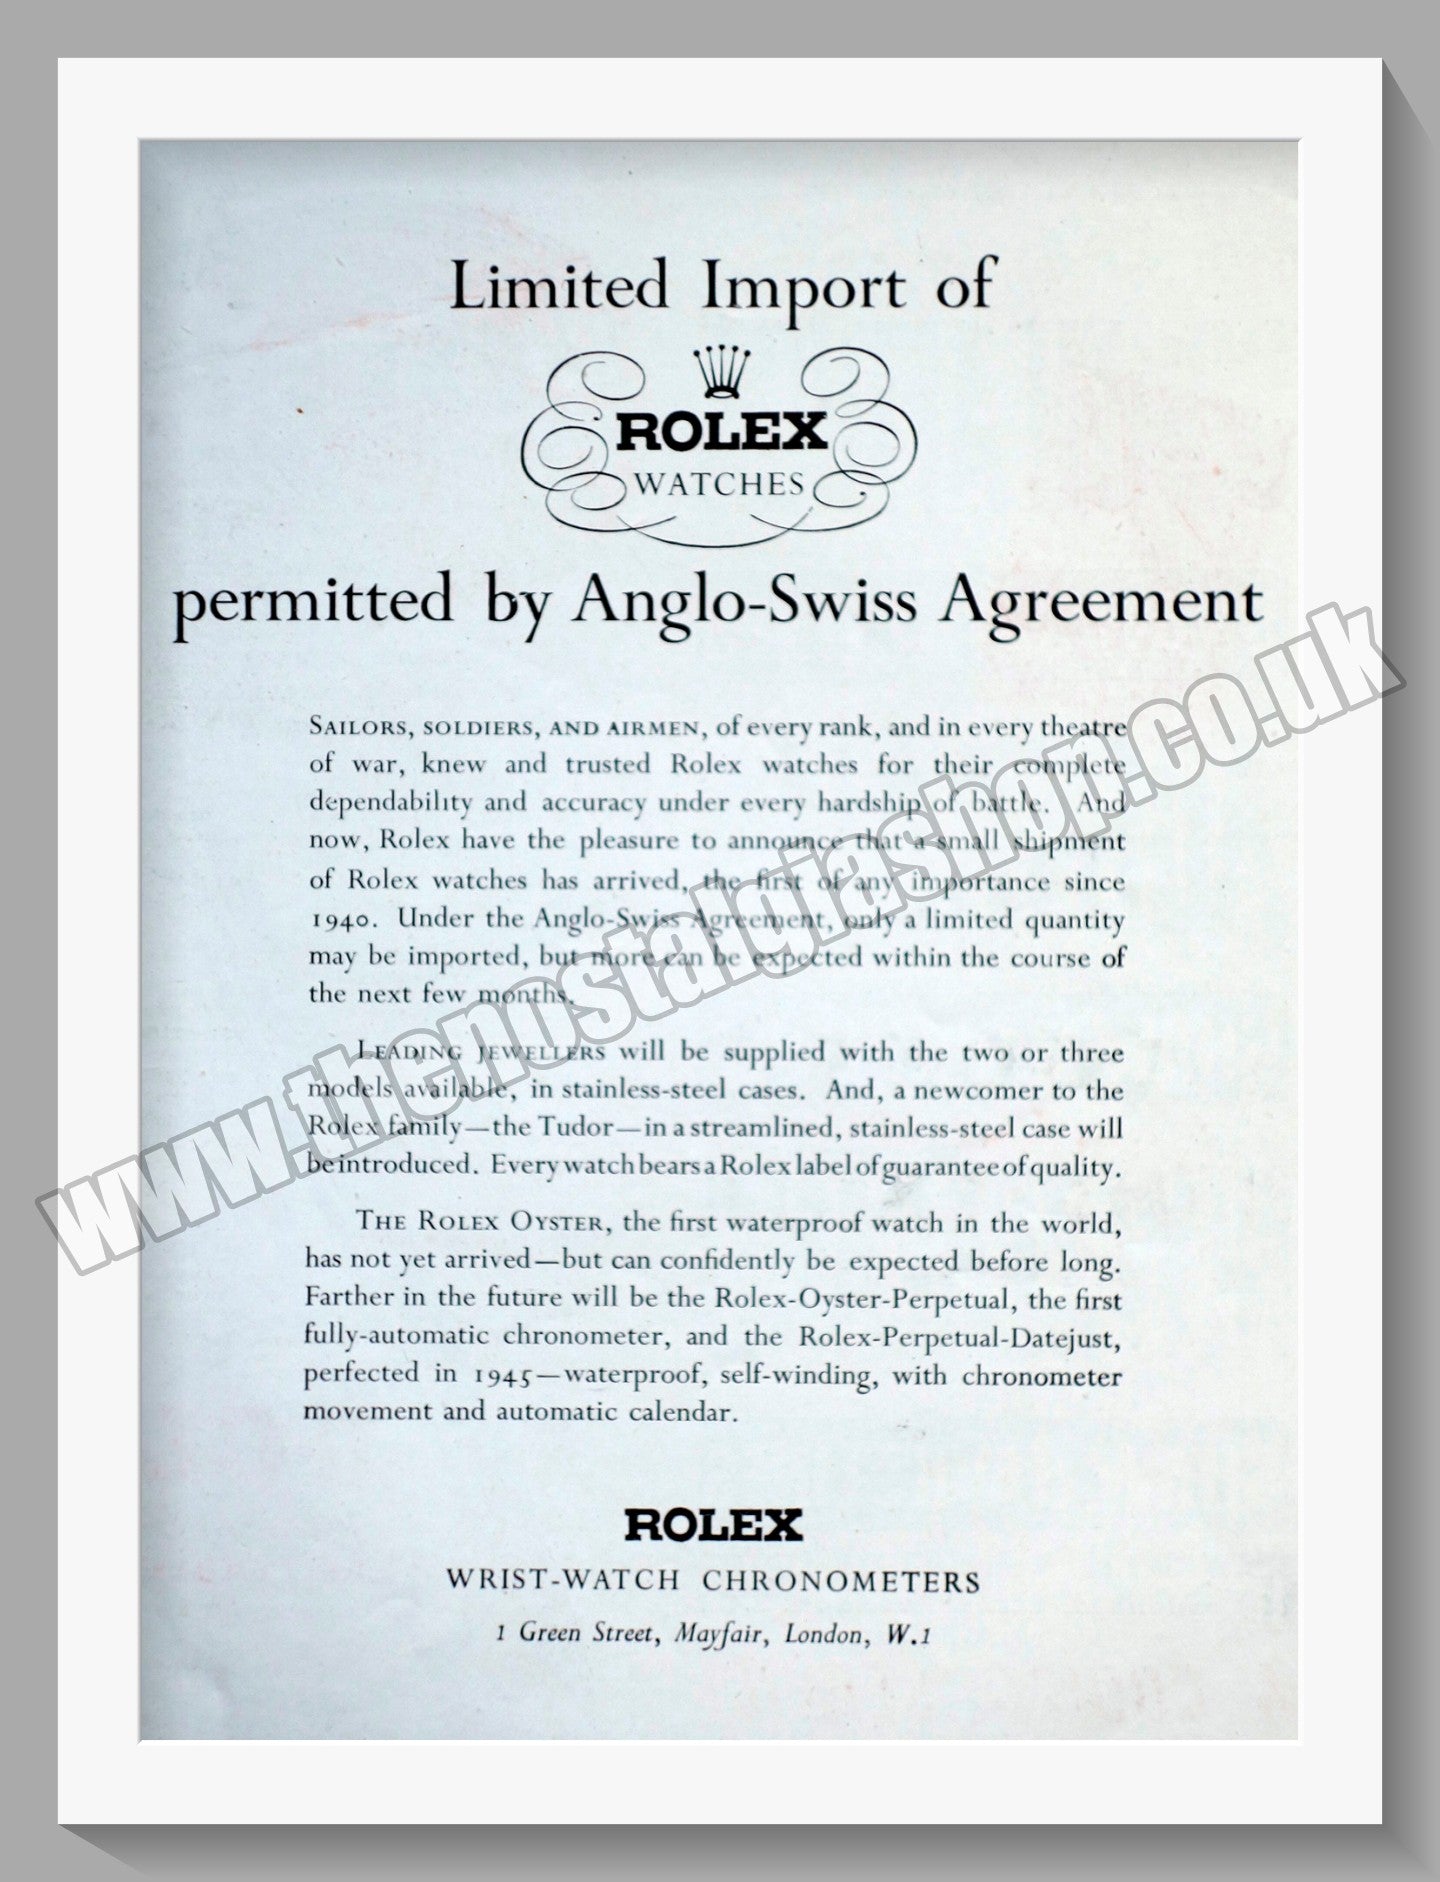 Rolex Watches Import Permitted by Anglo-Swiss Agreement. Original Advert 1947 (ref AD57794)